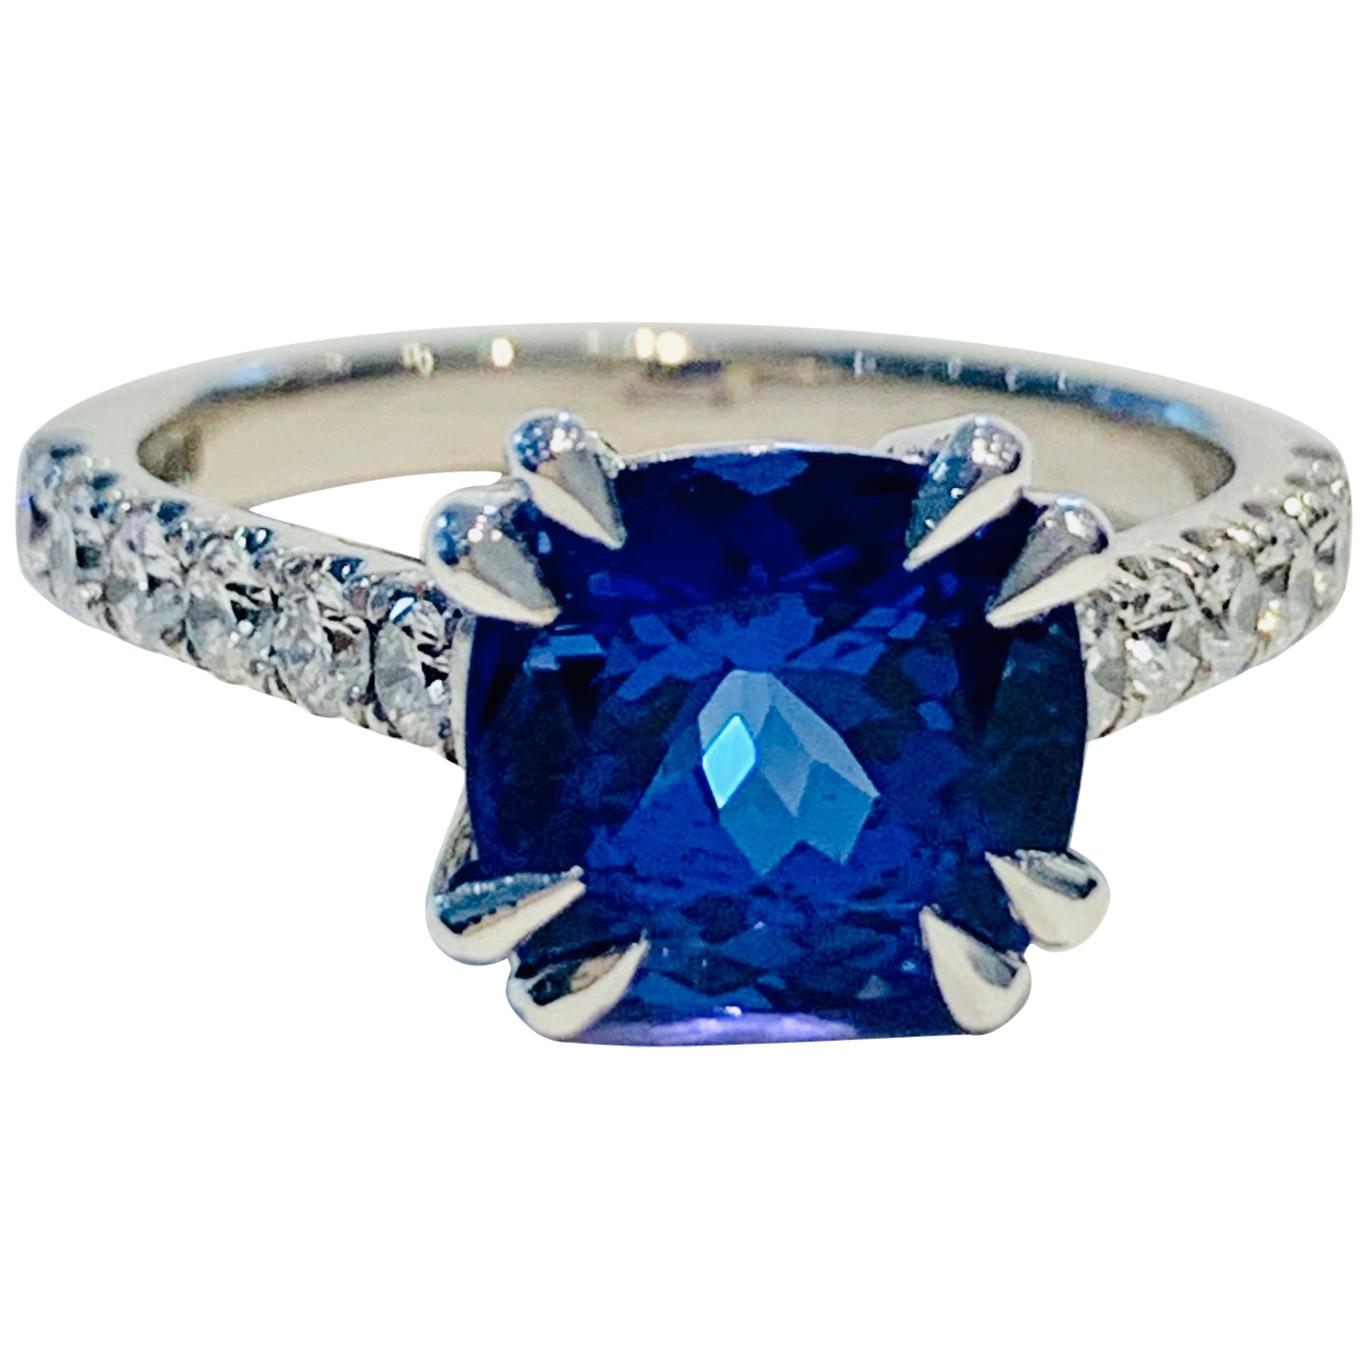 Bespoke 2.69ct AAAA Cushion Cut Tanzanite and Diamond Ring in 18ct White Gold For Sale